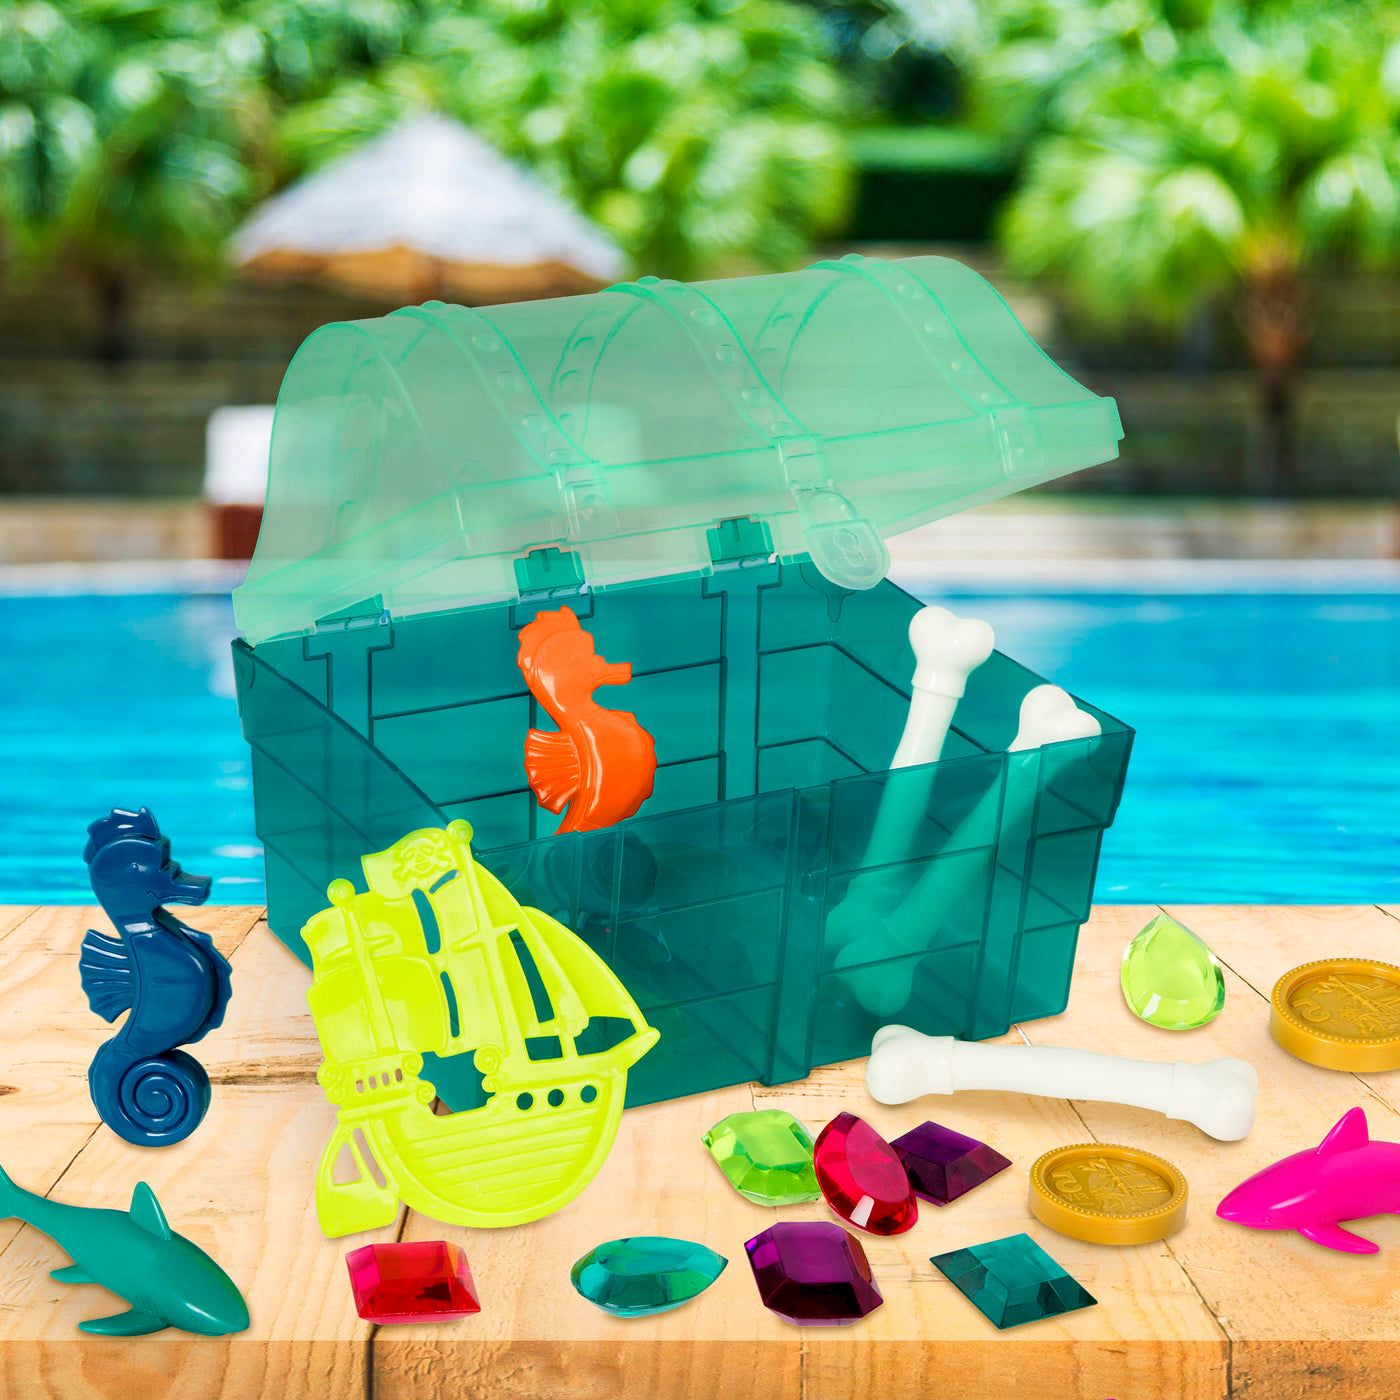 Pirate pool set with treasure chest.